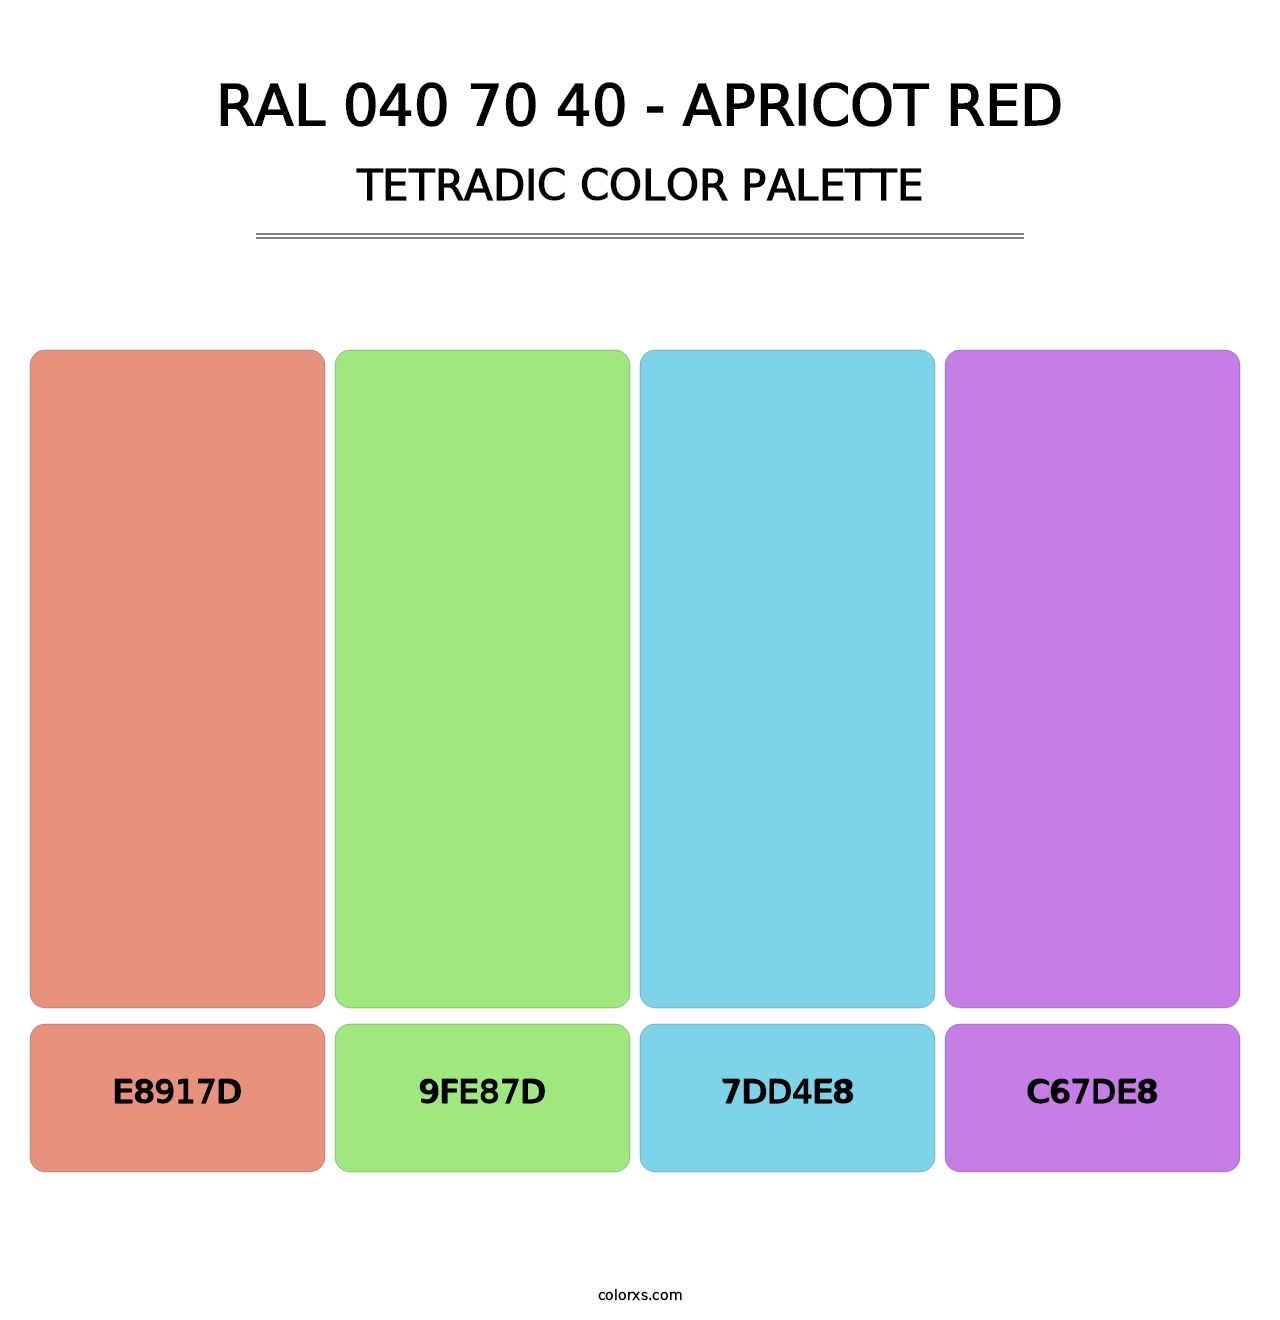 RAL 040 70 40 - Apricot Red - Tetradic Color Palette